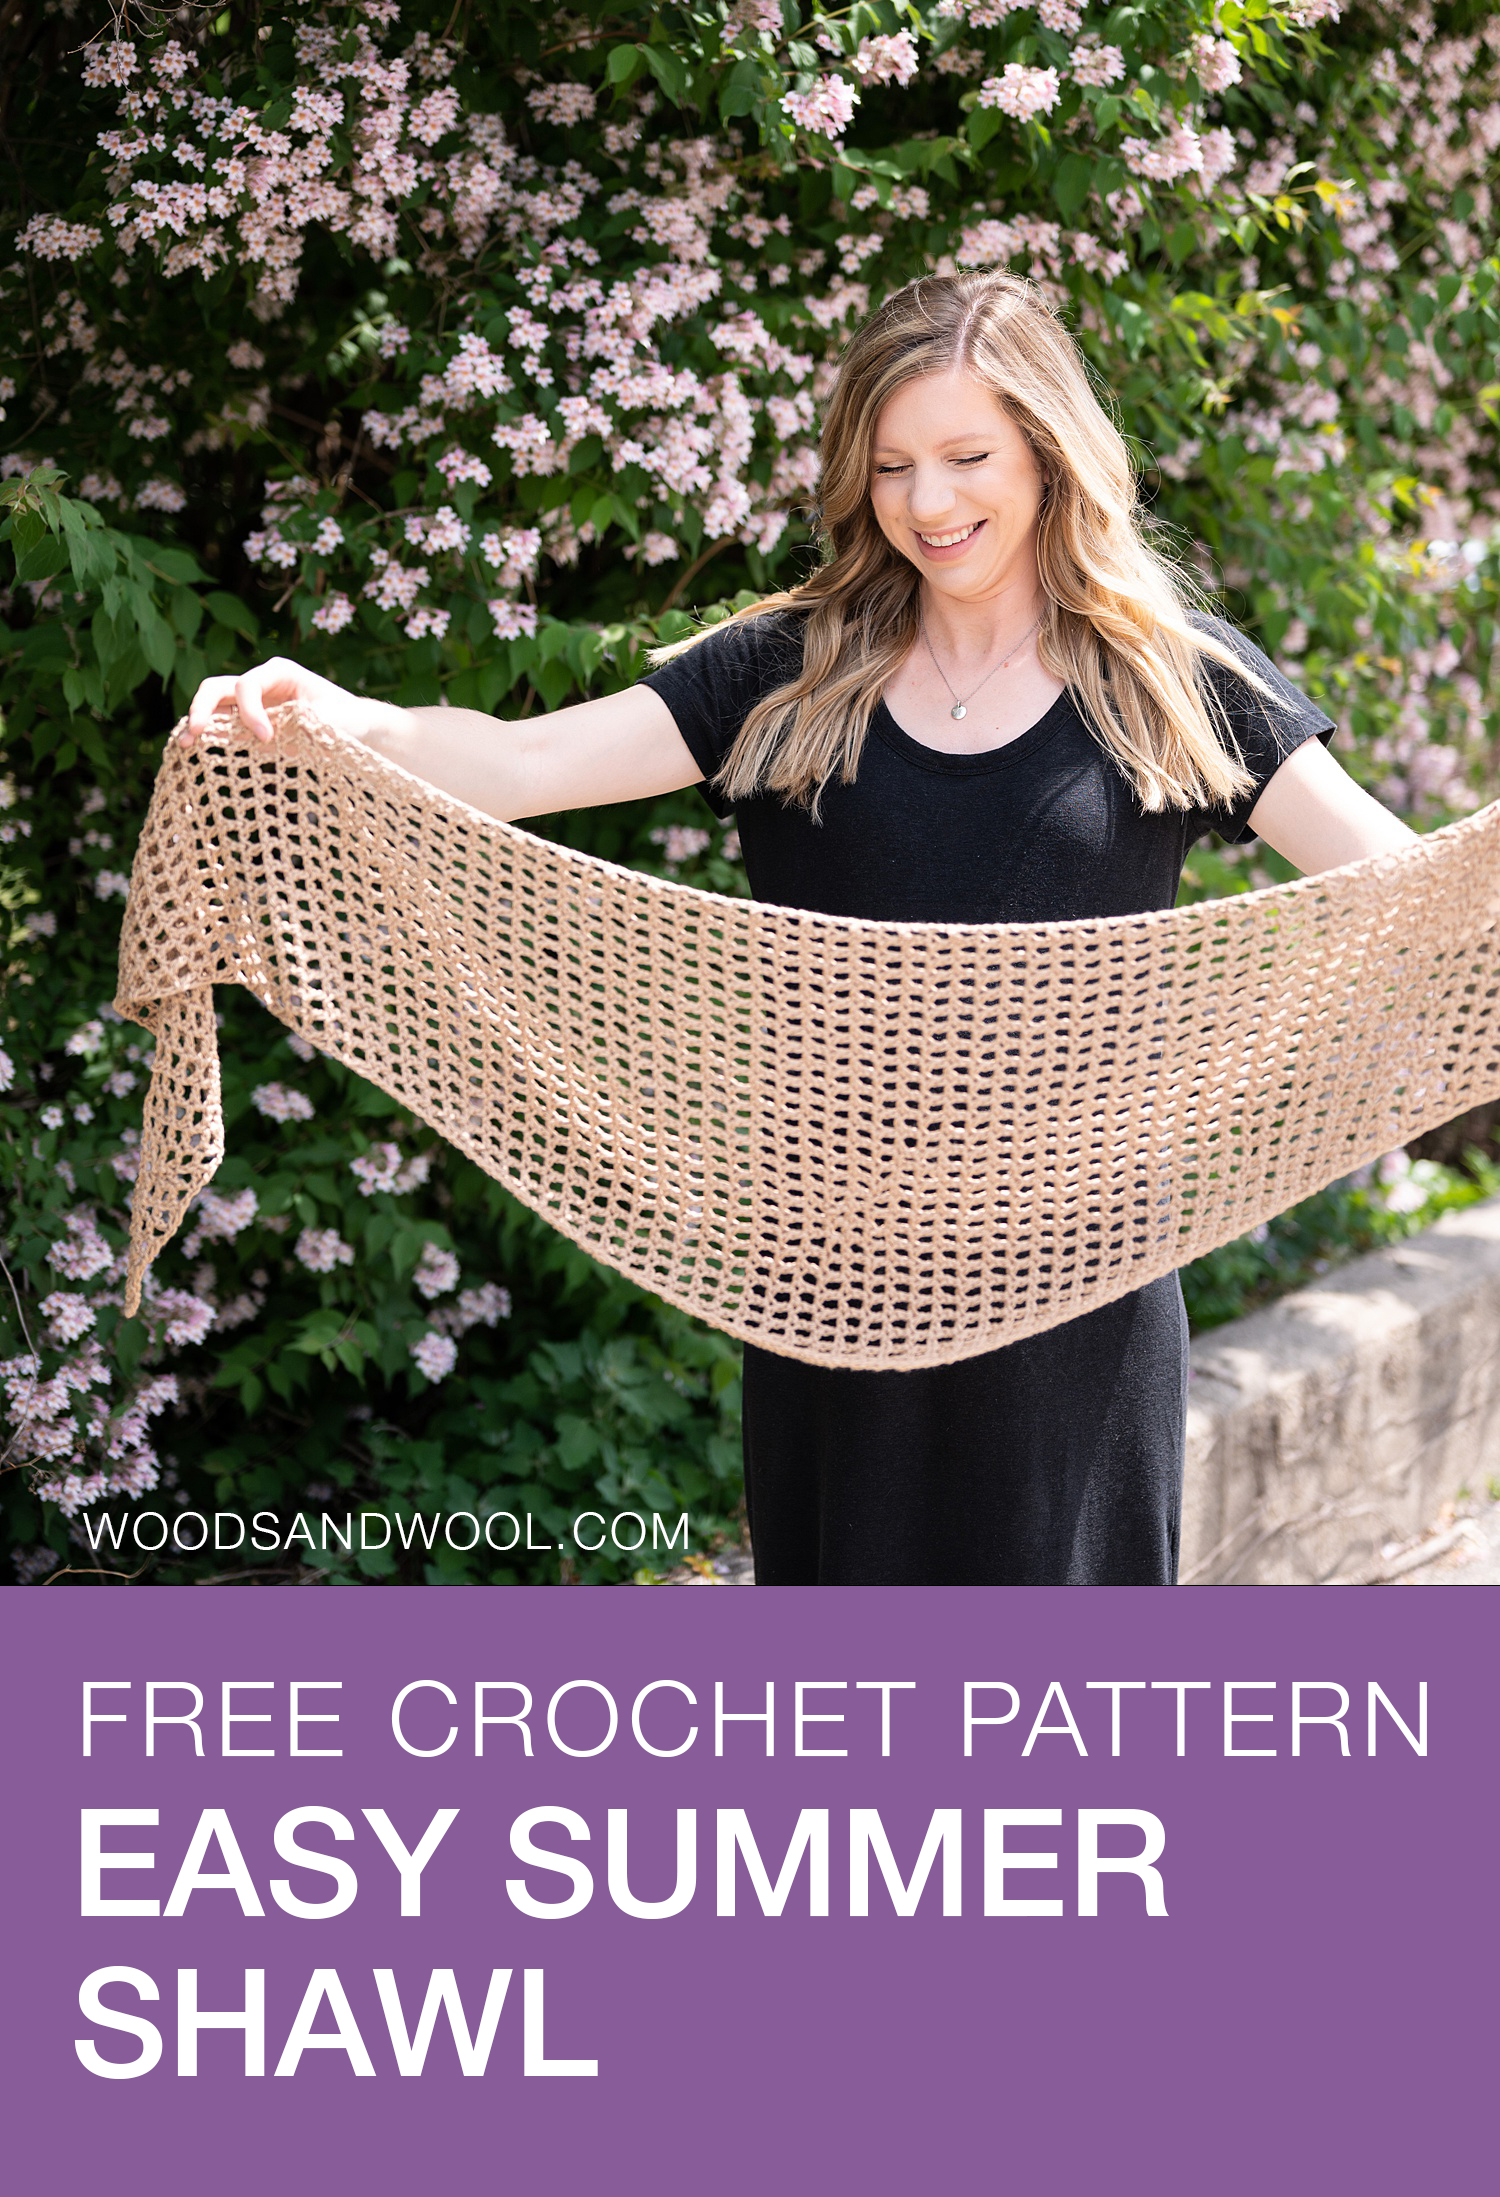 Free Crochet Pattern: Easy Summer Shawl - Woods and Wool